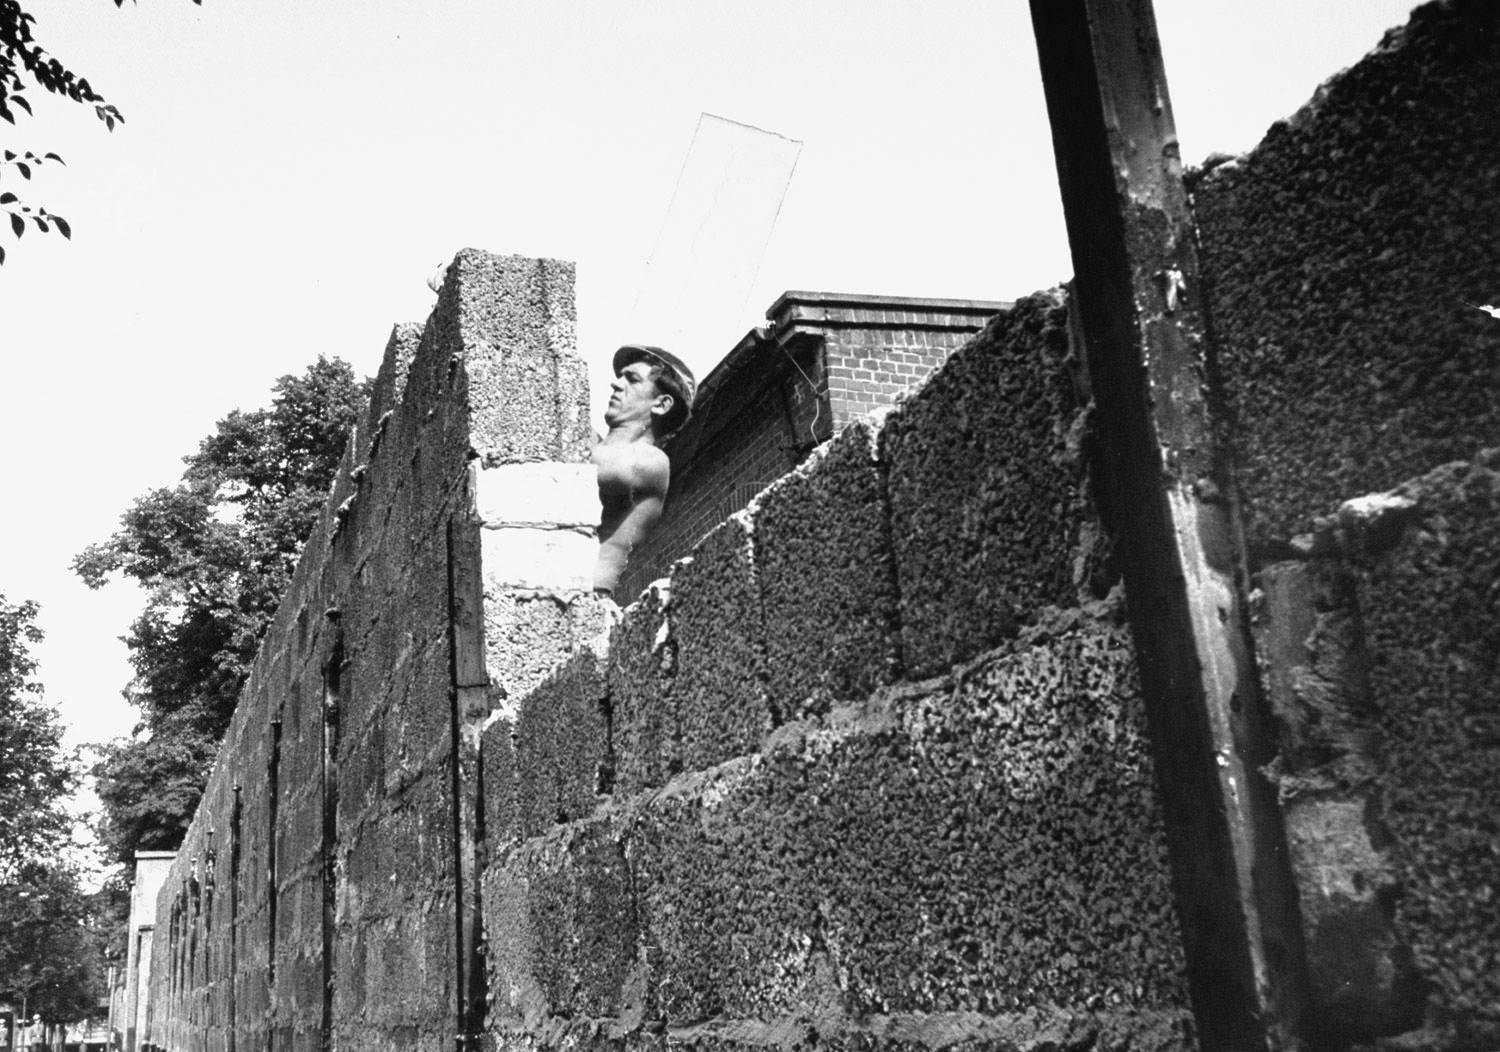 An East German mason builds up a fresh portion of the Berlin Wall in August 1961.